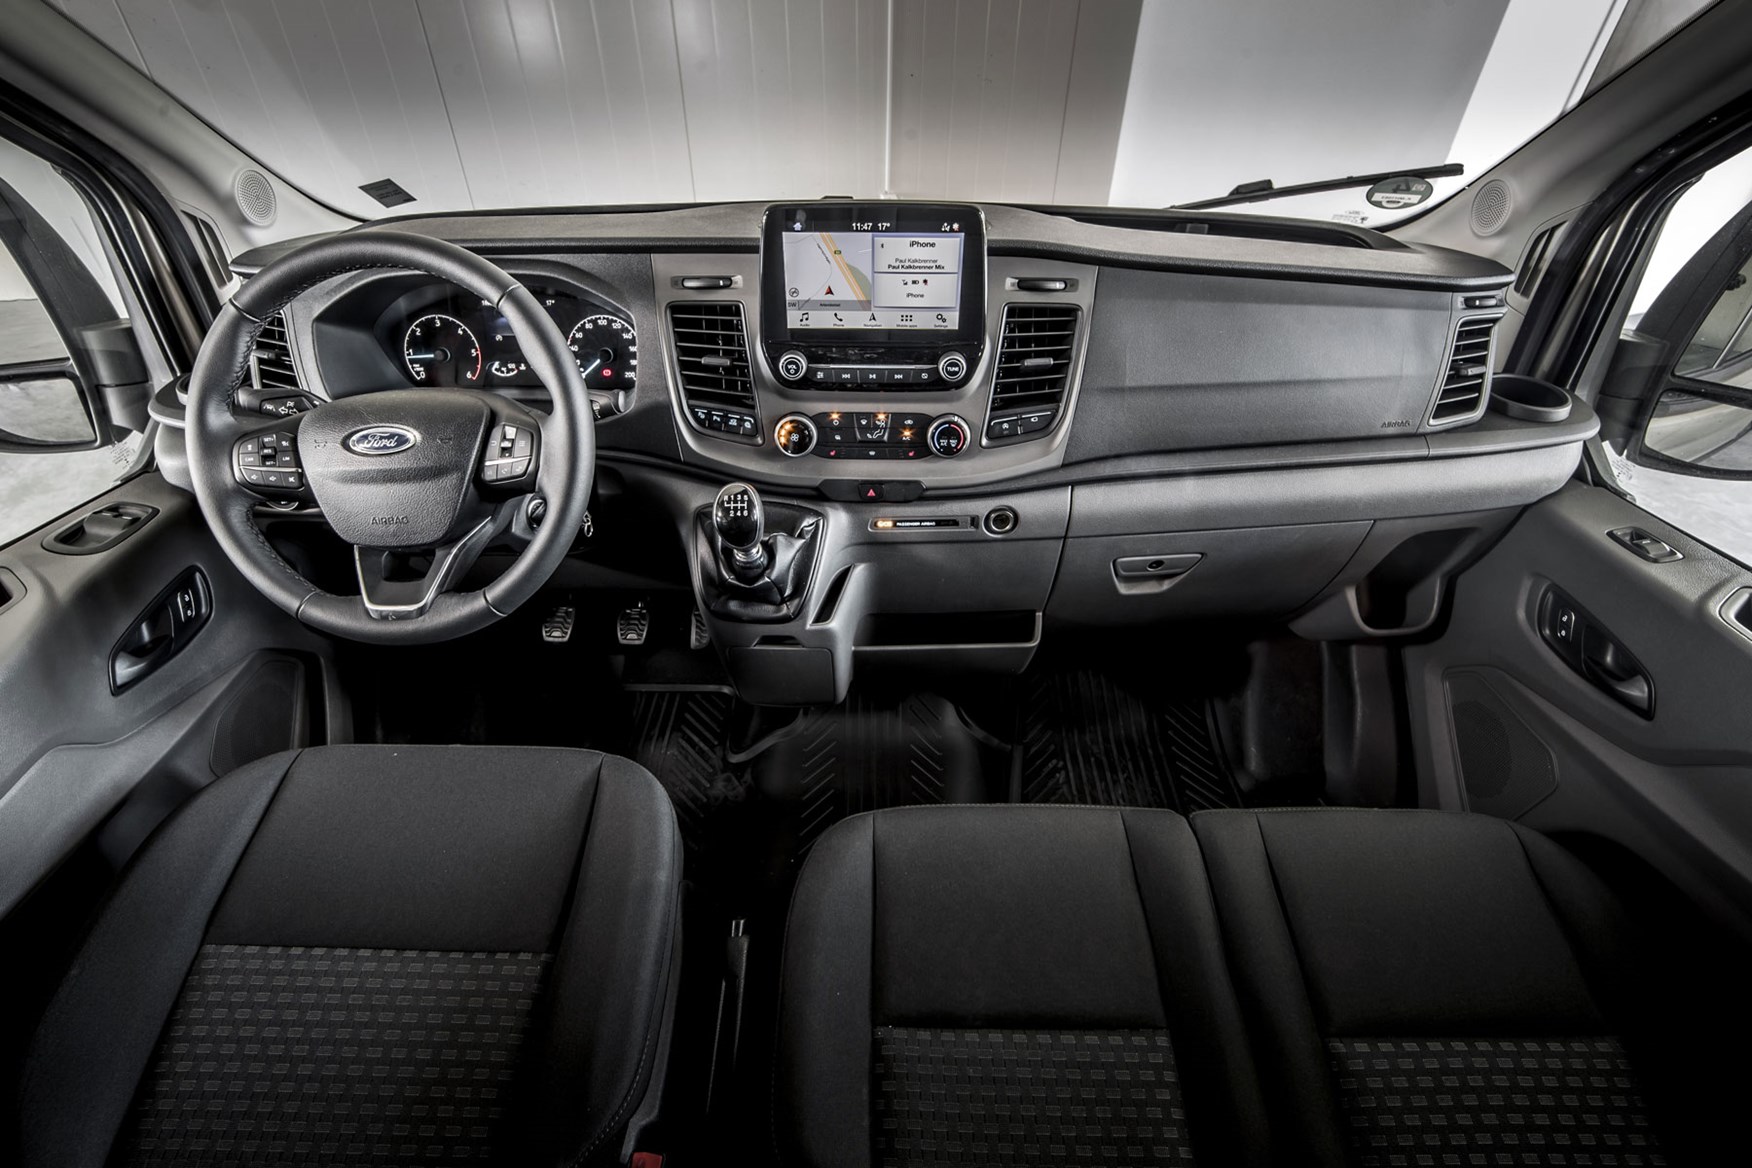 Ford Transit review - 2019 facelift model, dashboard, full view